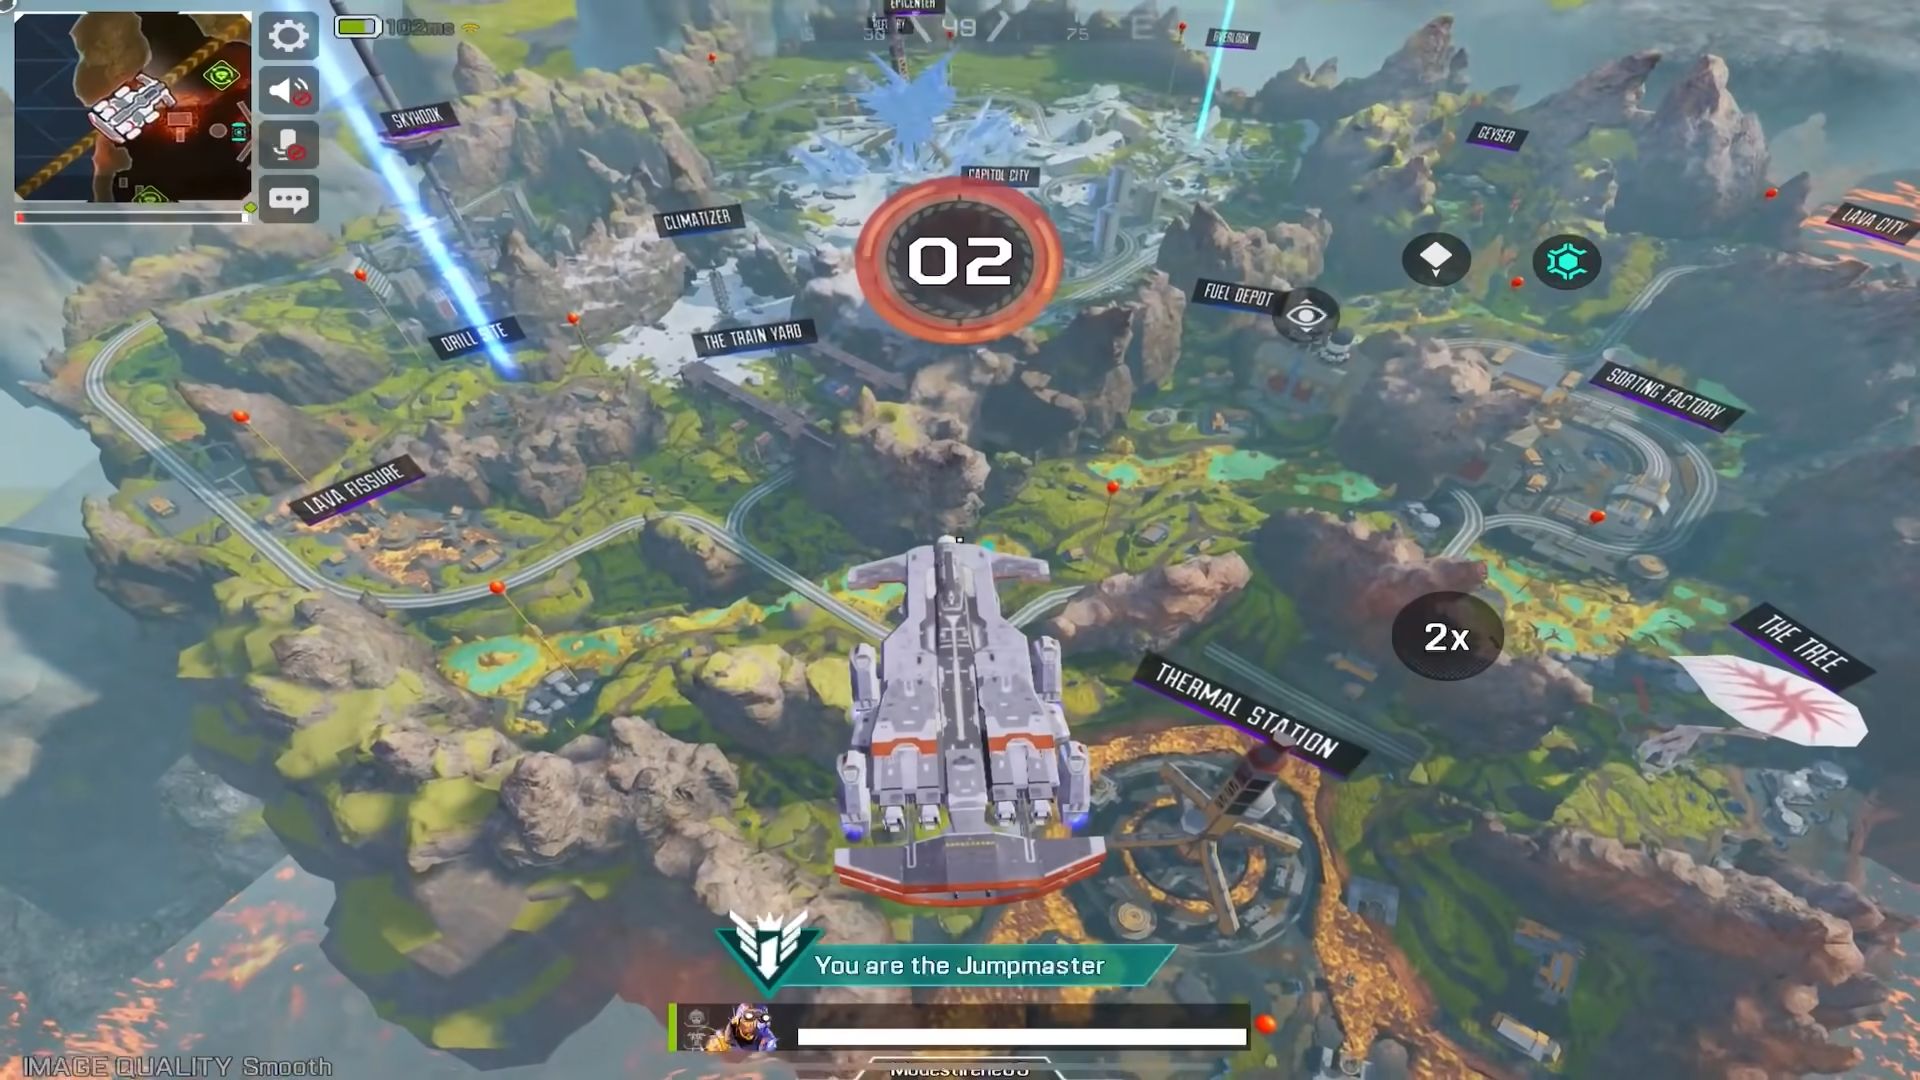 Apex Legends Mobile for Android